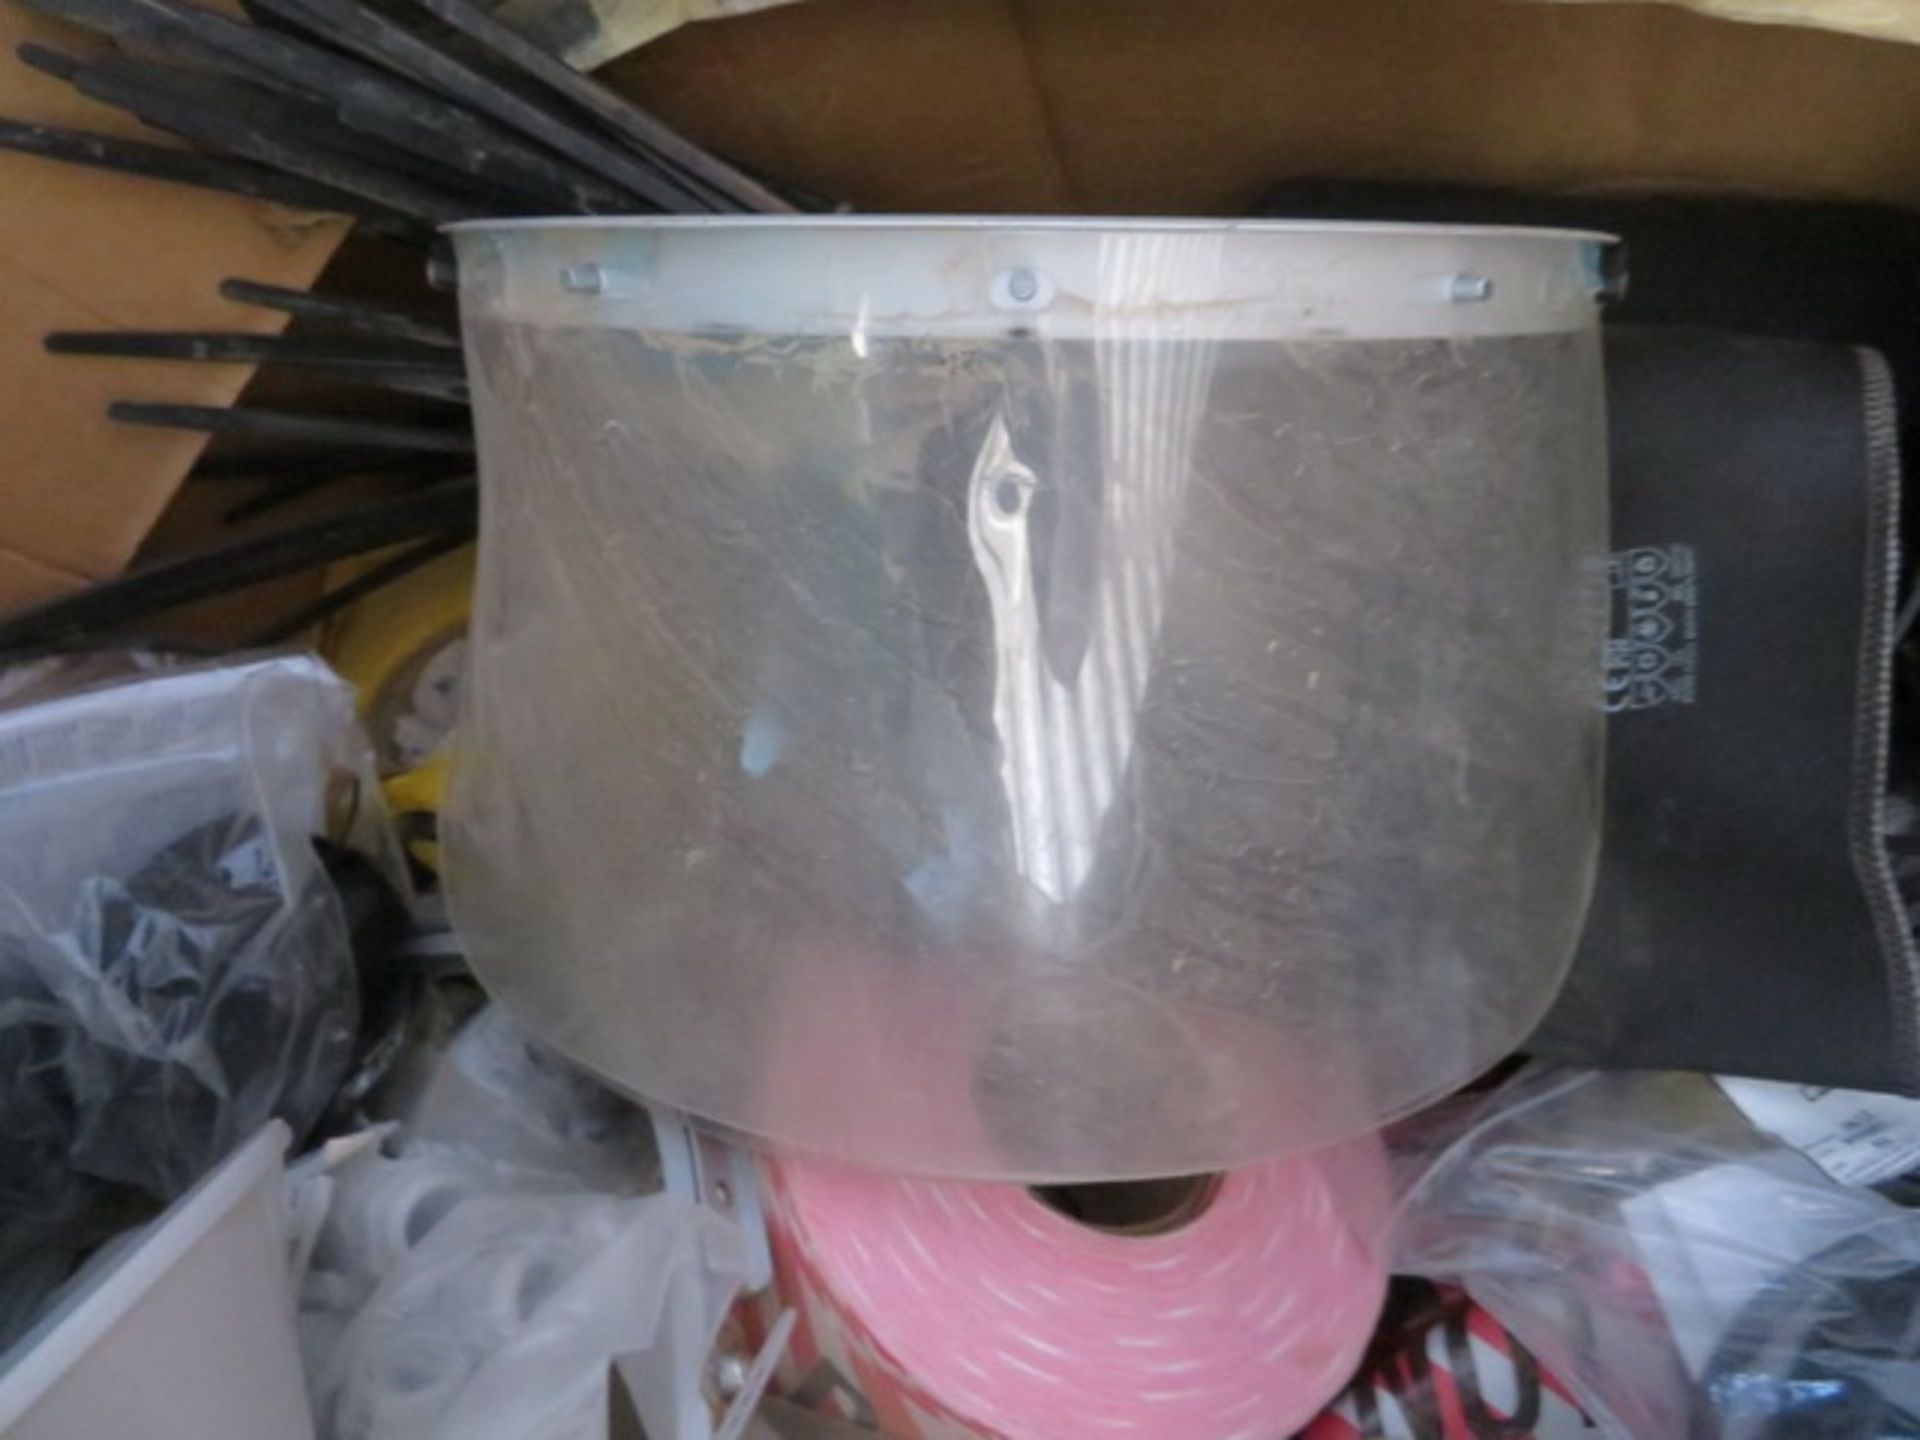 Contents of Shipping Container. To Include 1/2" PVDF Tubing, Safety Glasses, Safety Signs, - Image 8 of 51